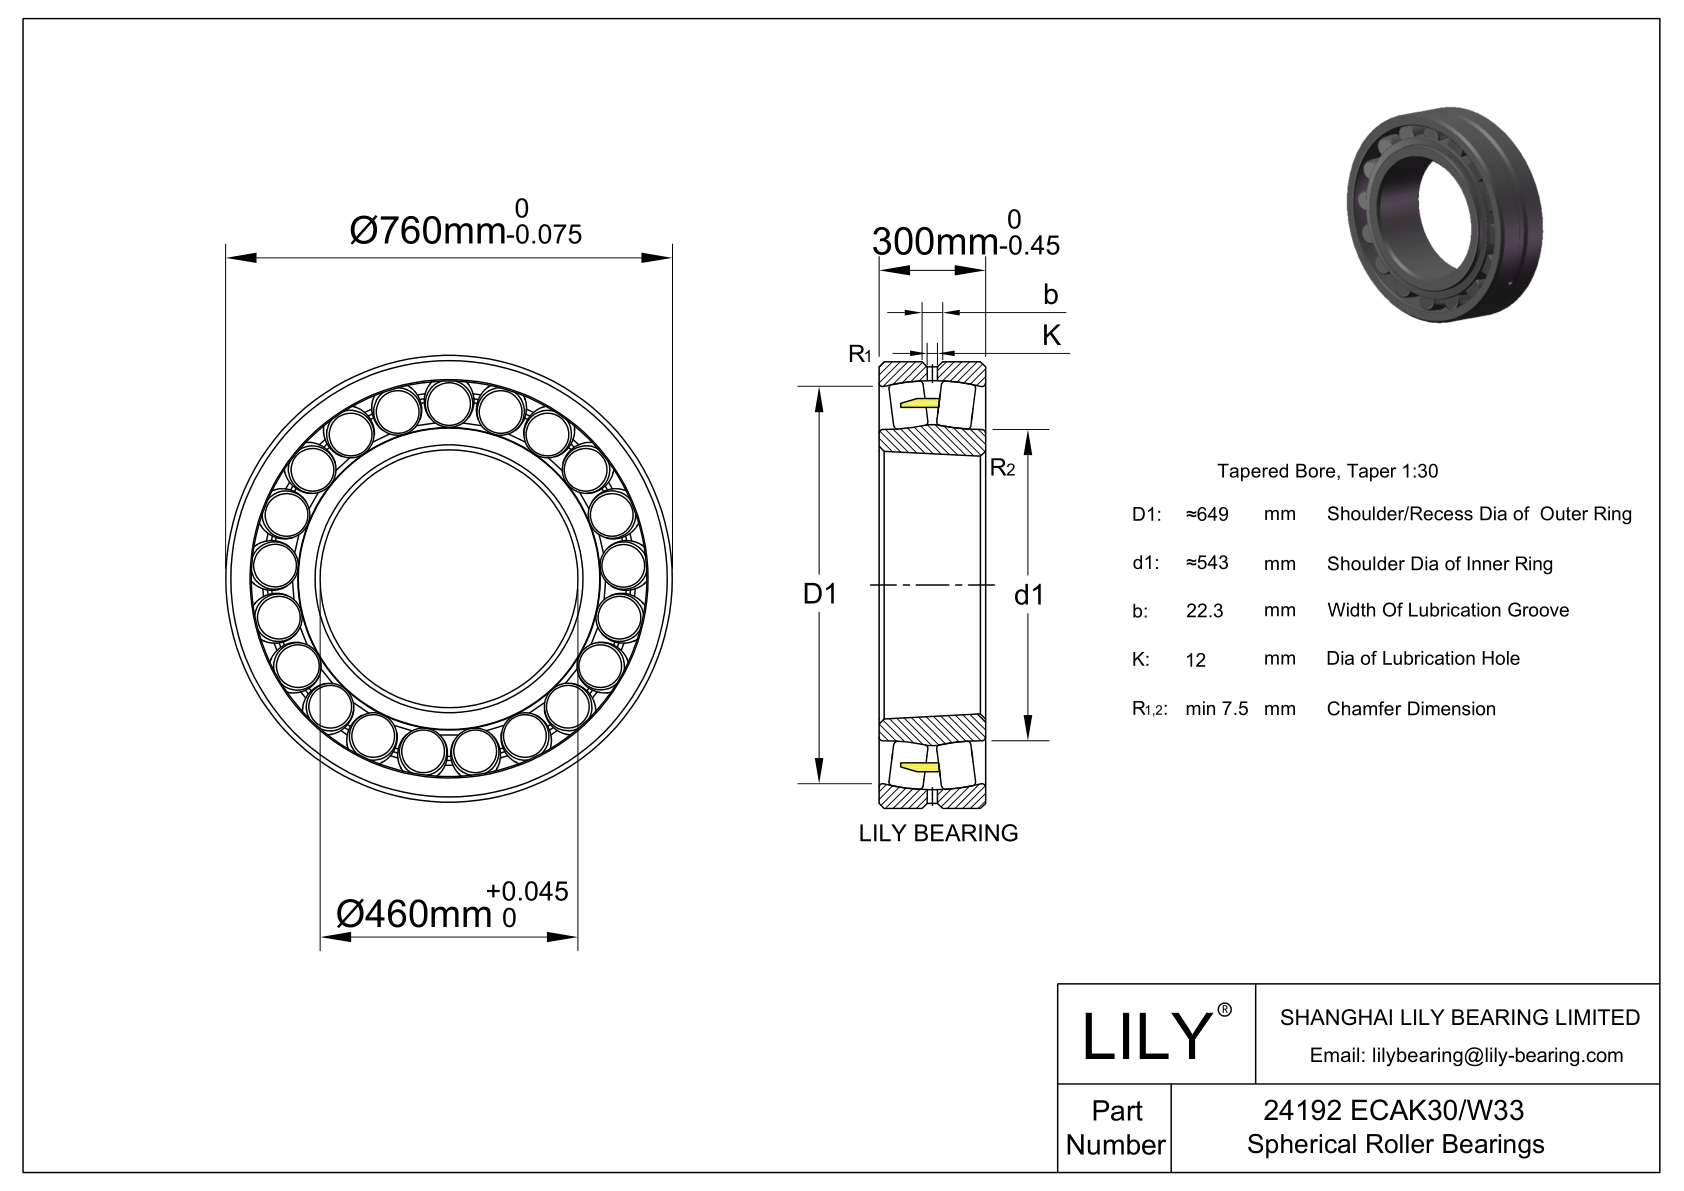 24192 ECAK30/W33 Double Row Spherical Roller Bearing cad drawing